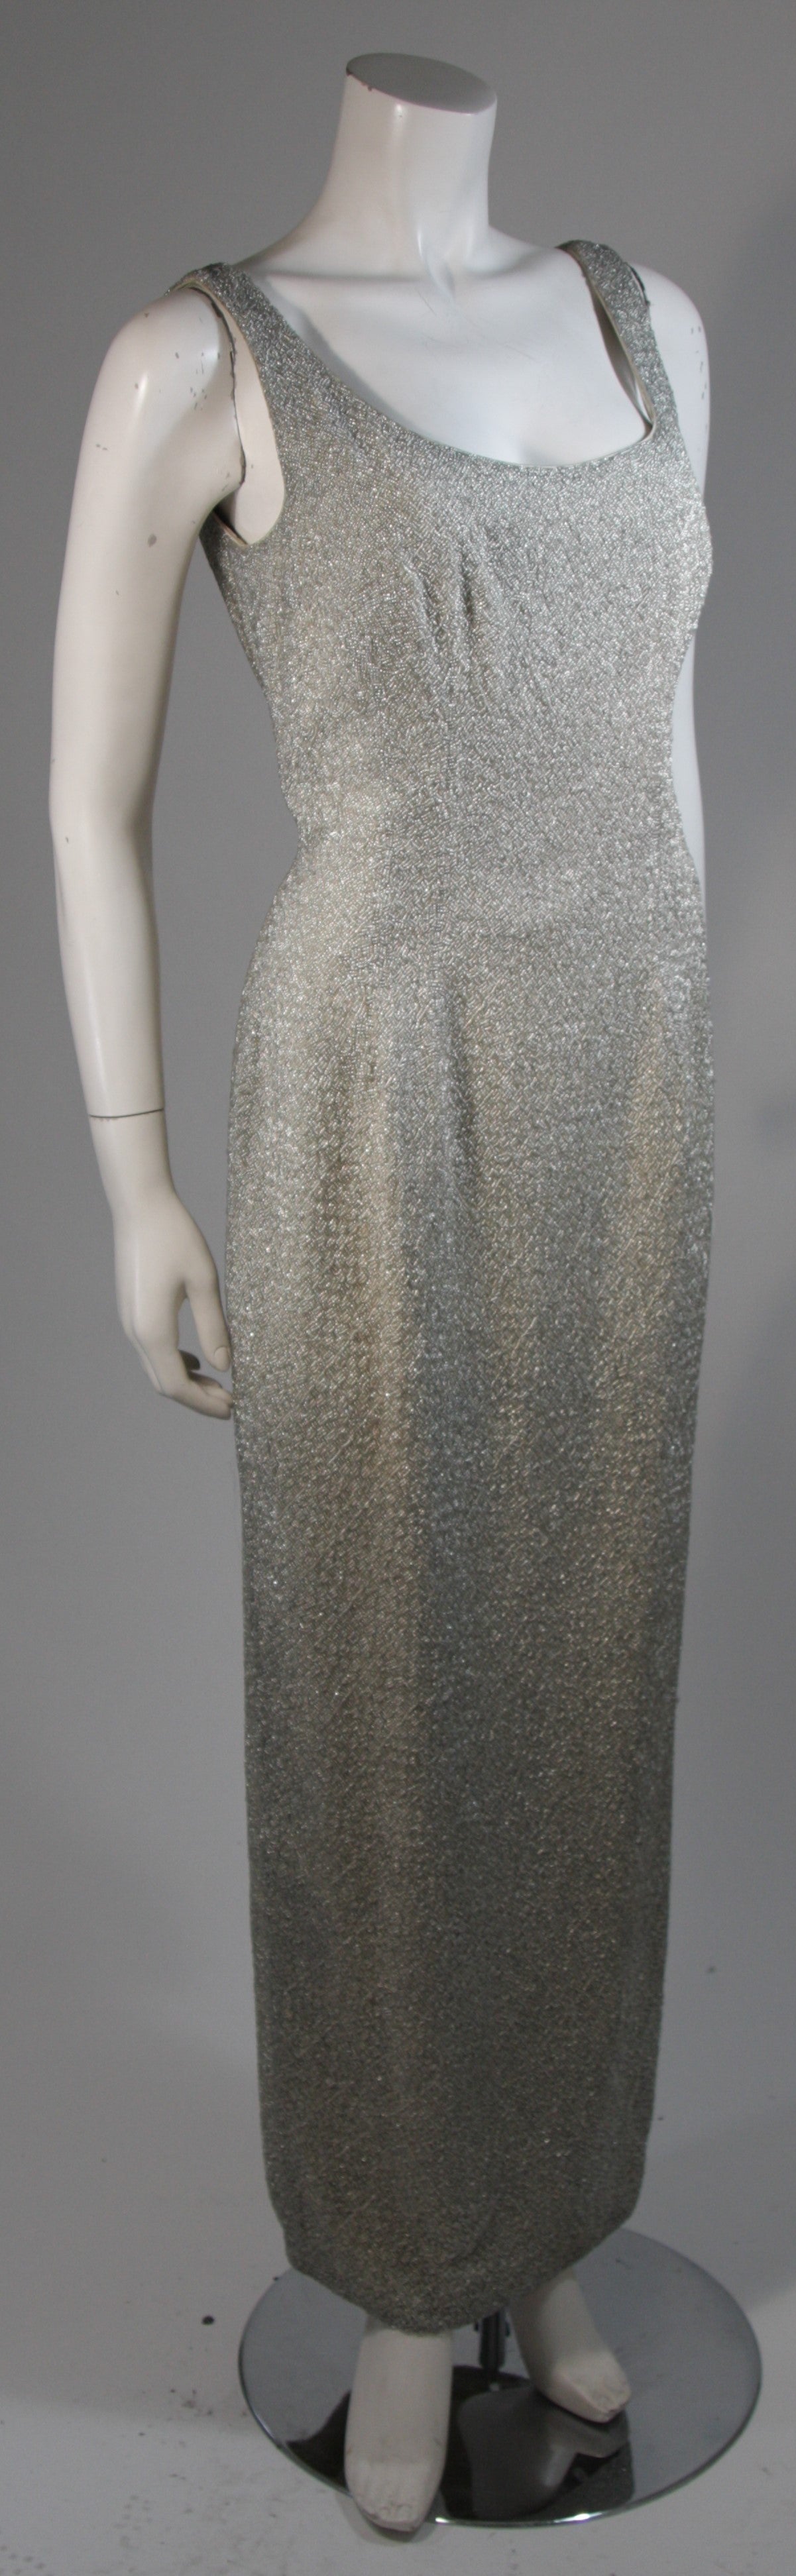 1960s Haute Couture International Heavily Beaded Gown Size Medium In Excellent Condition For Sale In Los Angeles, CA